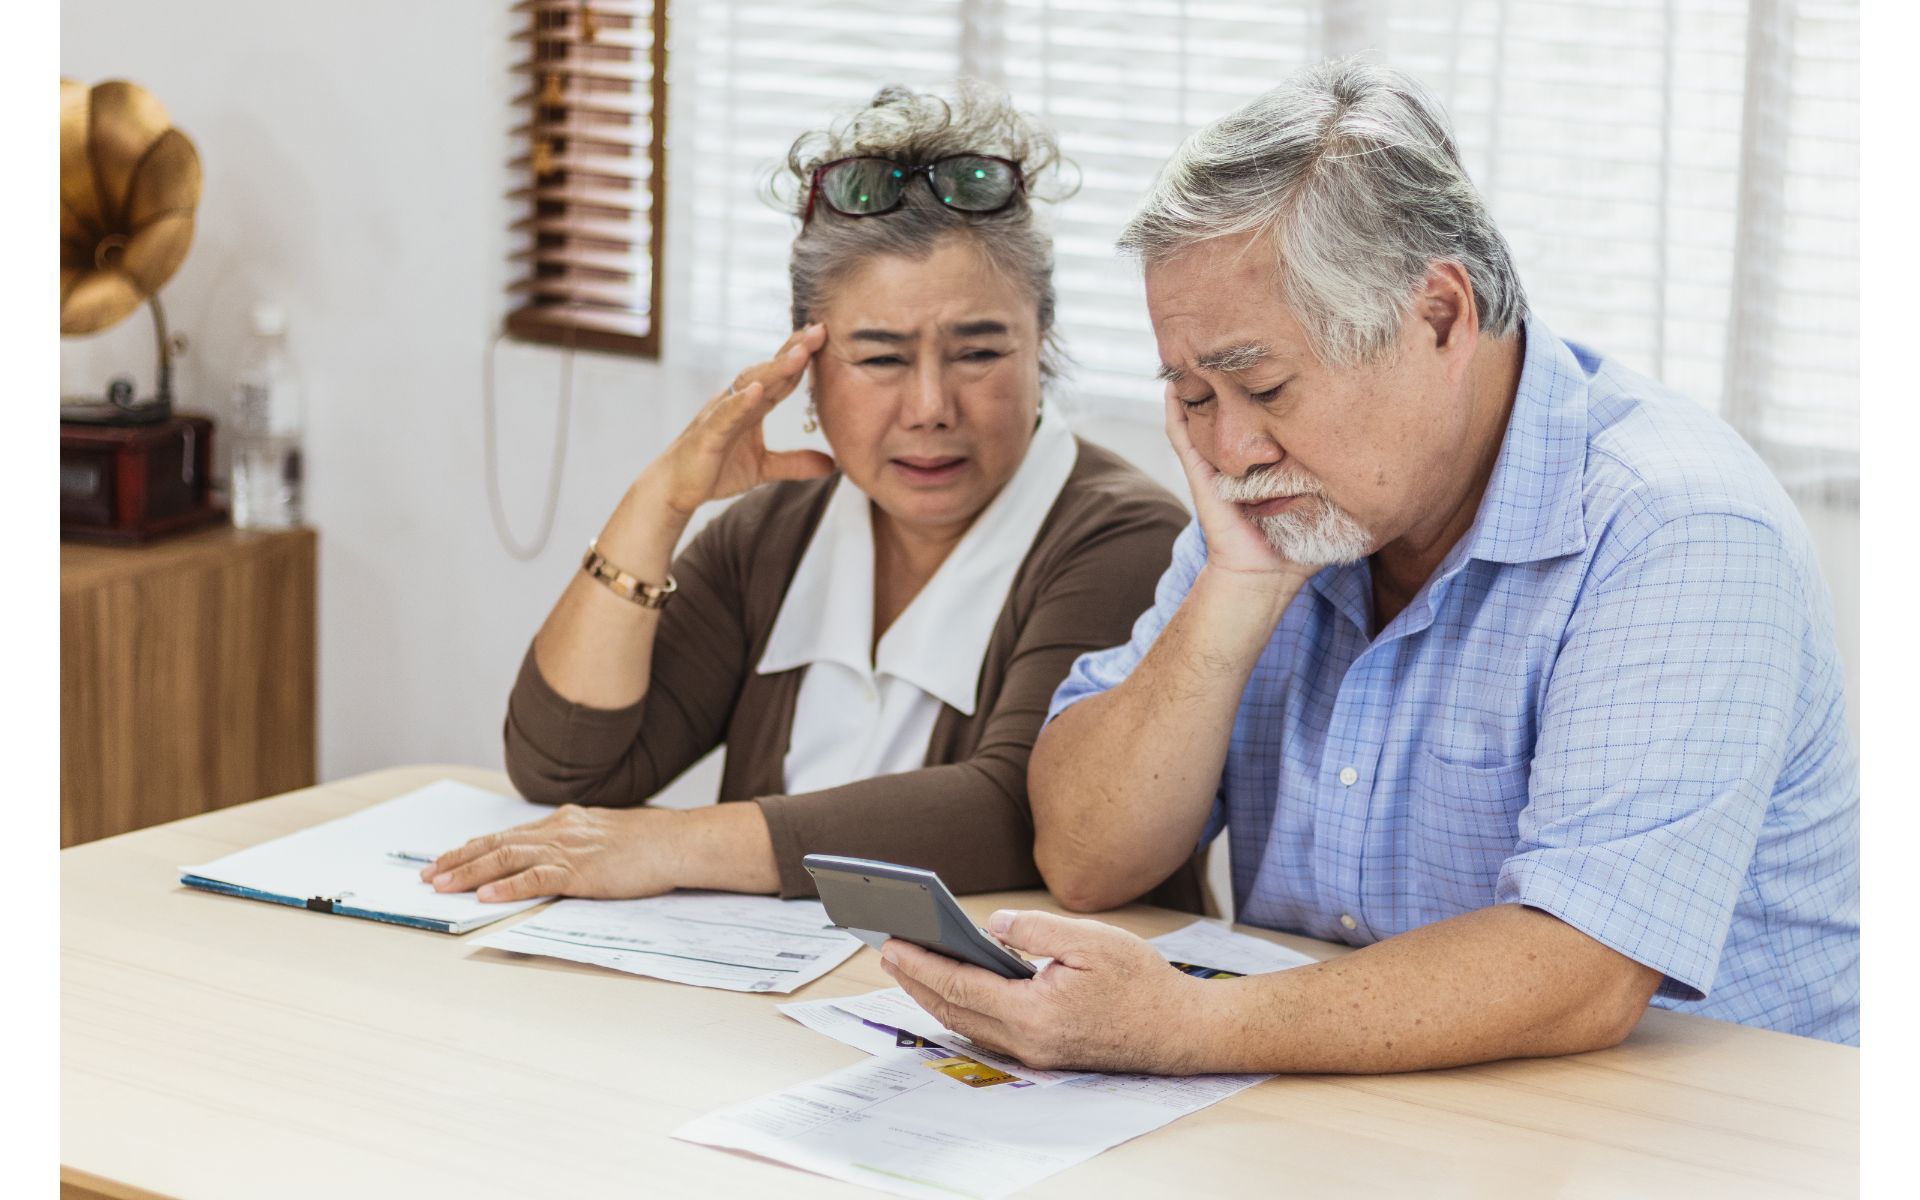 Older couple looking stressed while reviewing financial documents.